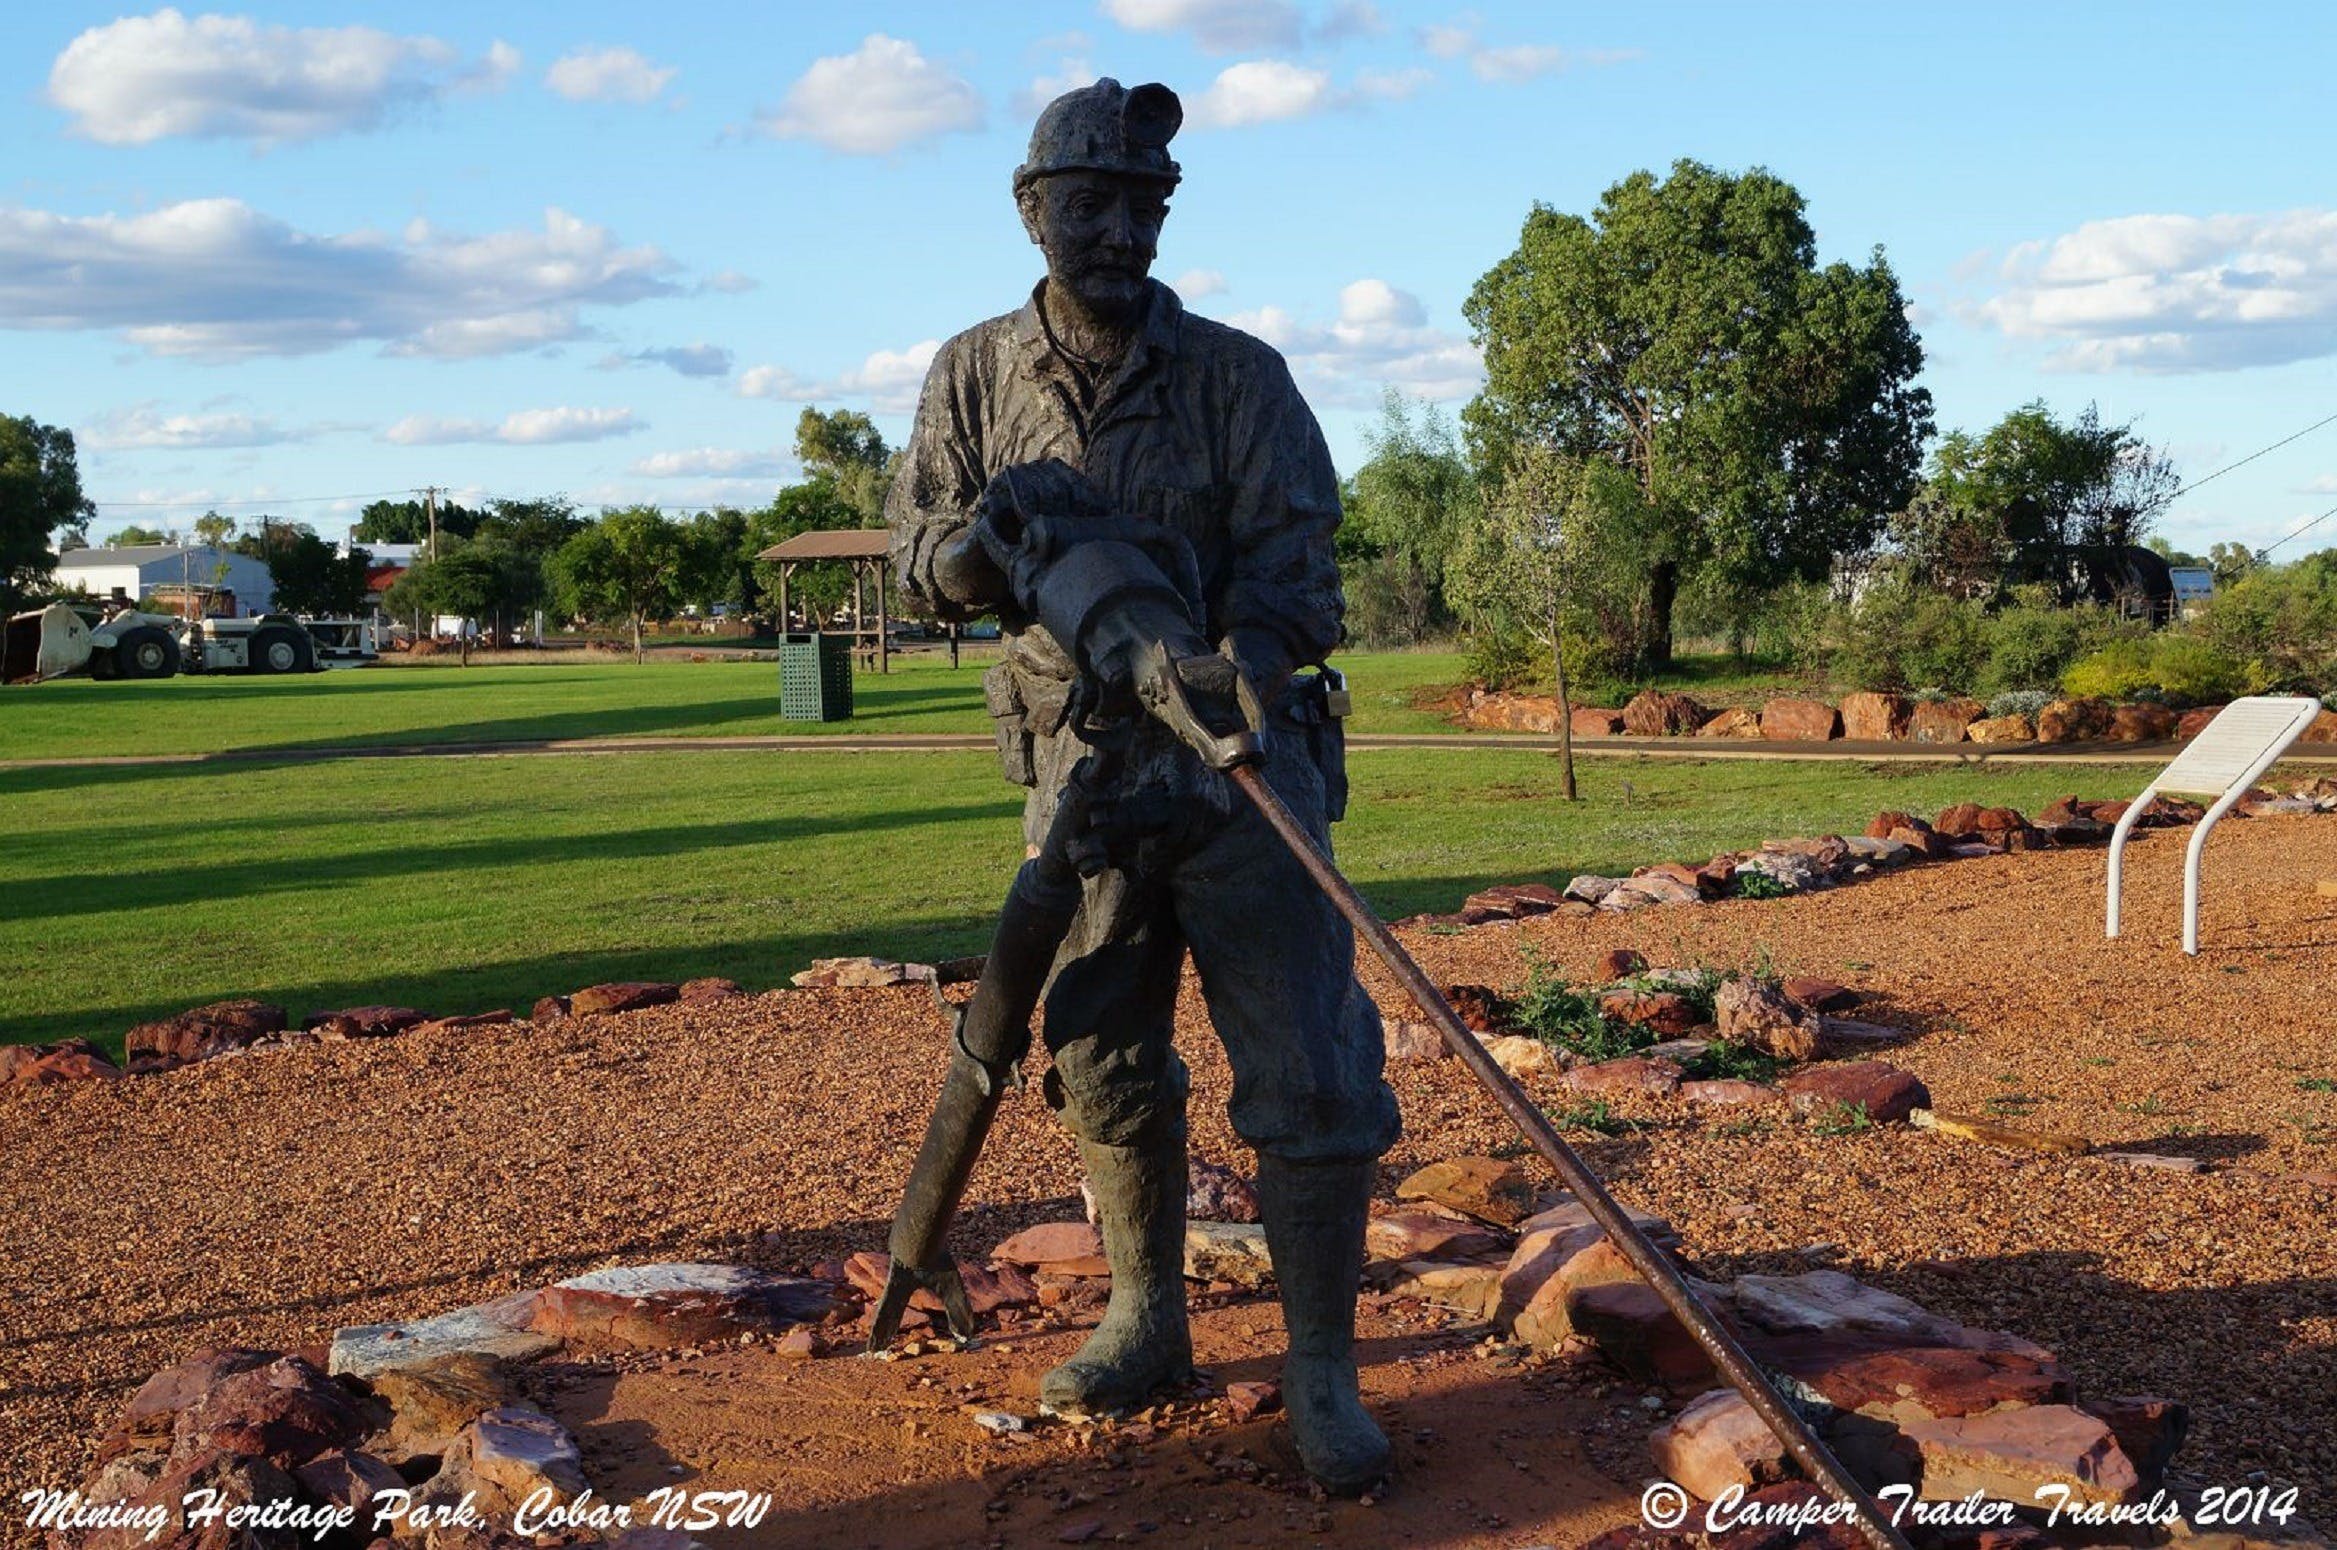 Cobar Miners Heritage Park - Tourism Adelaide